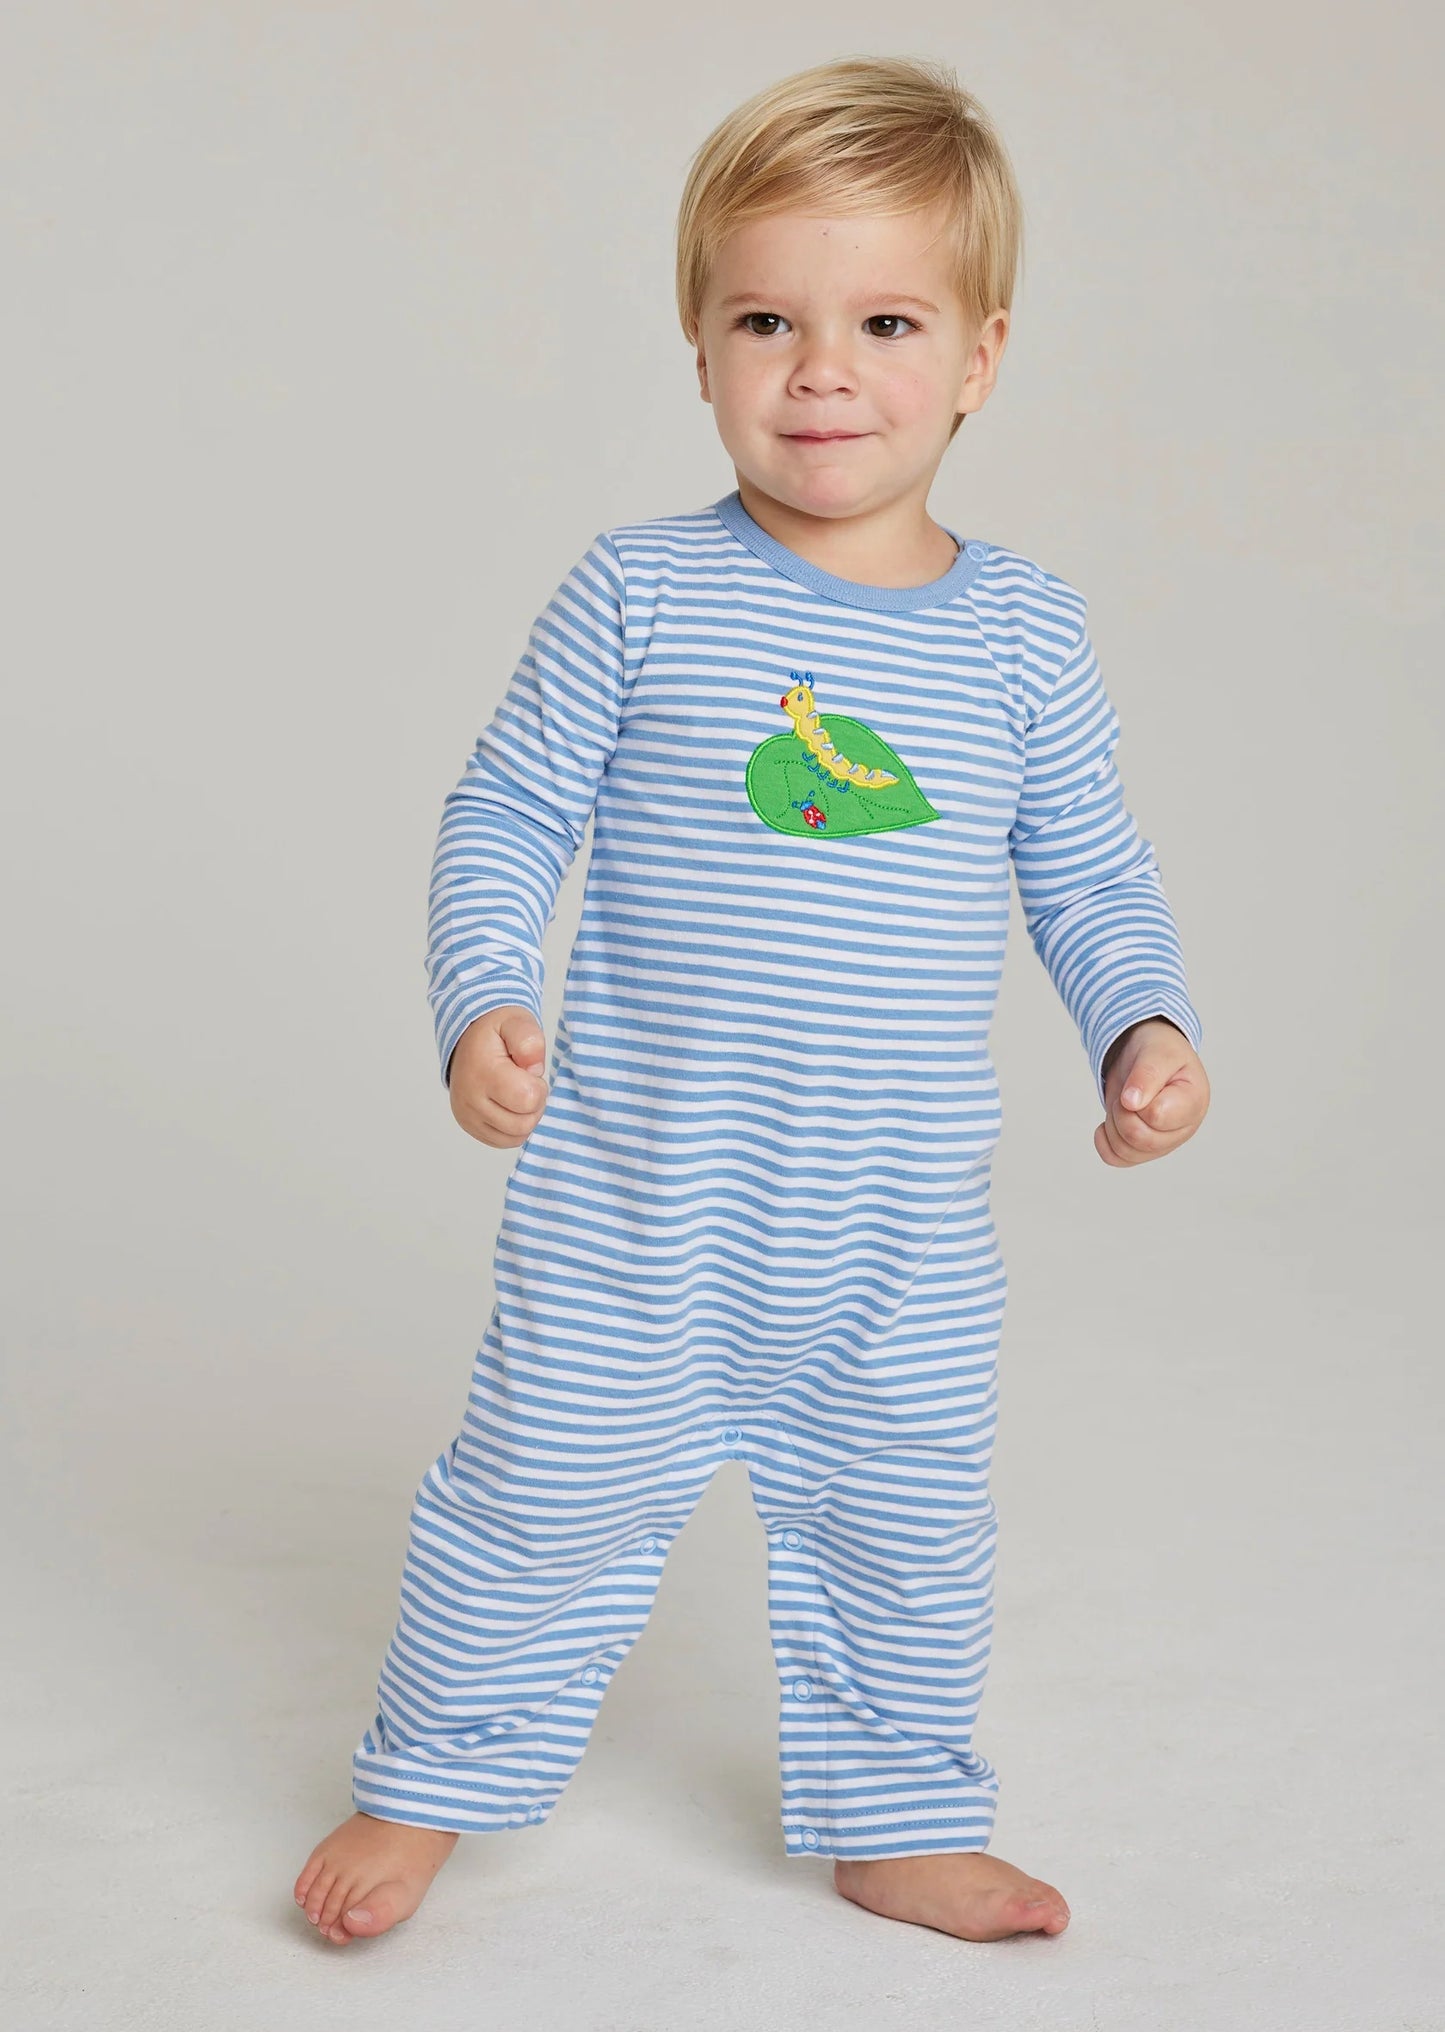 Little English Caterpillar Applique Romper for baby and children 